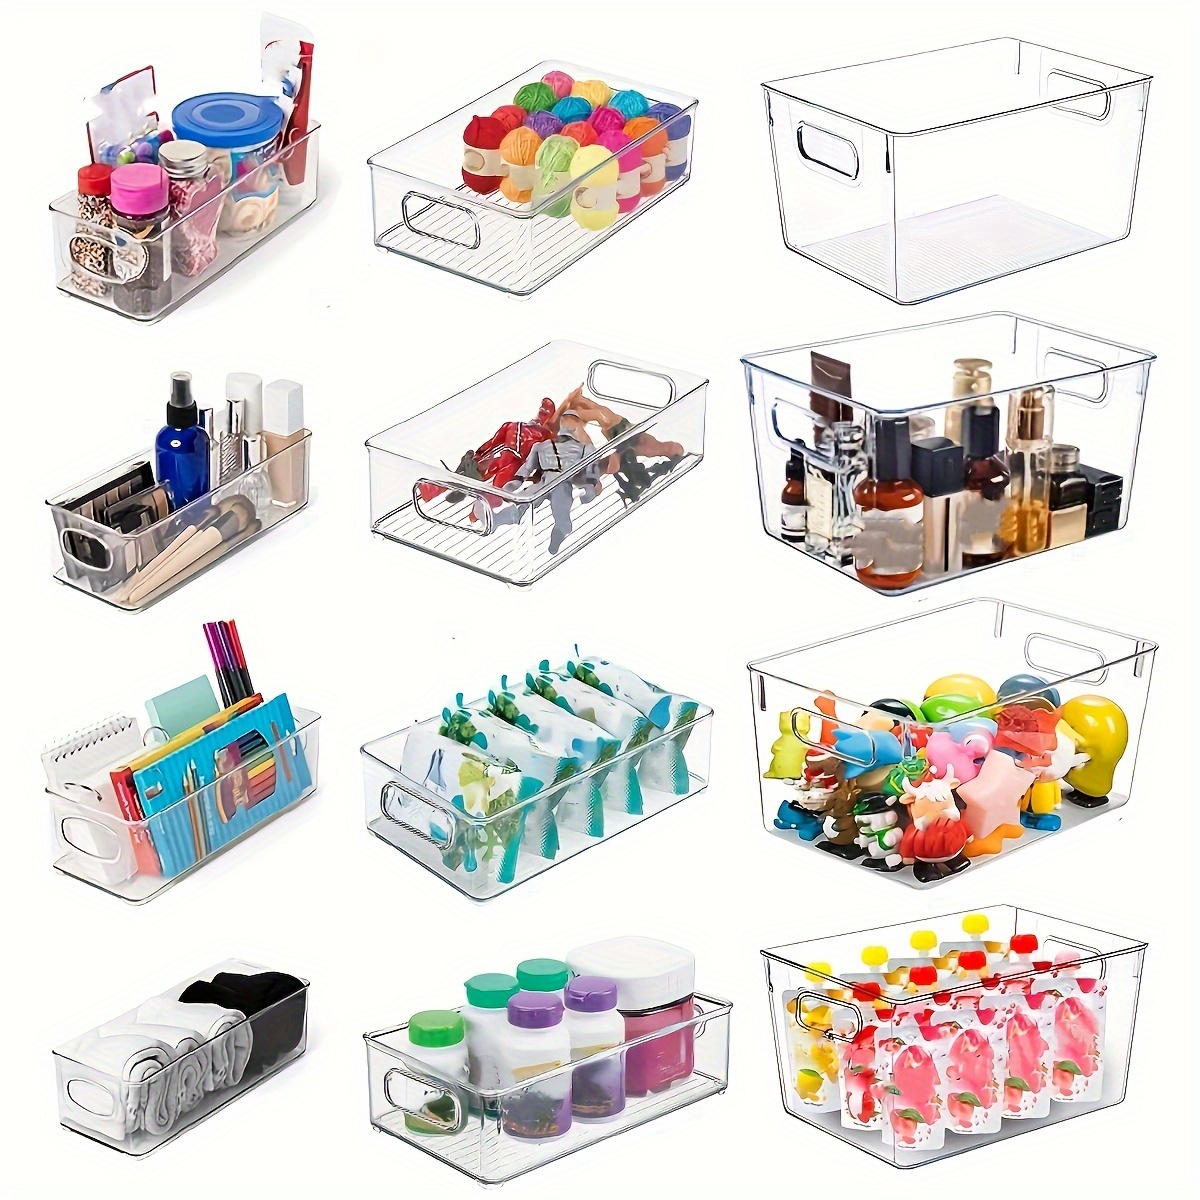  BINO, Clear Storage Organizer, THE HOLDER COLLECTION, Clear  Containers for Organizing with Built-in Handles, Pantry Organization and  Storage, Fridge Organizer, Smart Storage Bin Cabinet